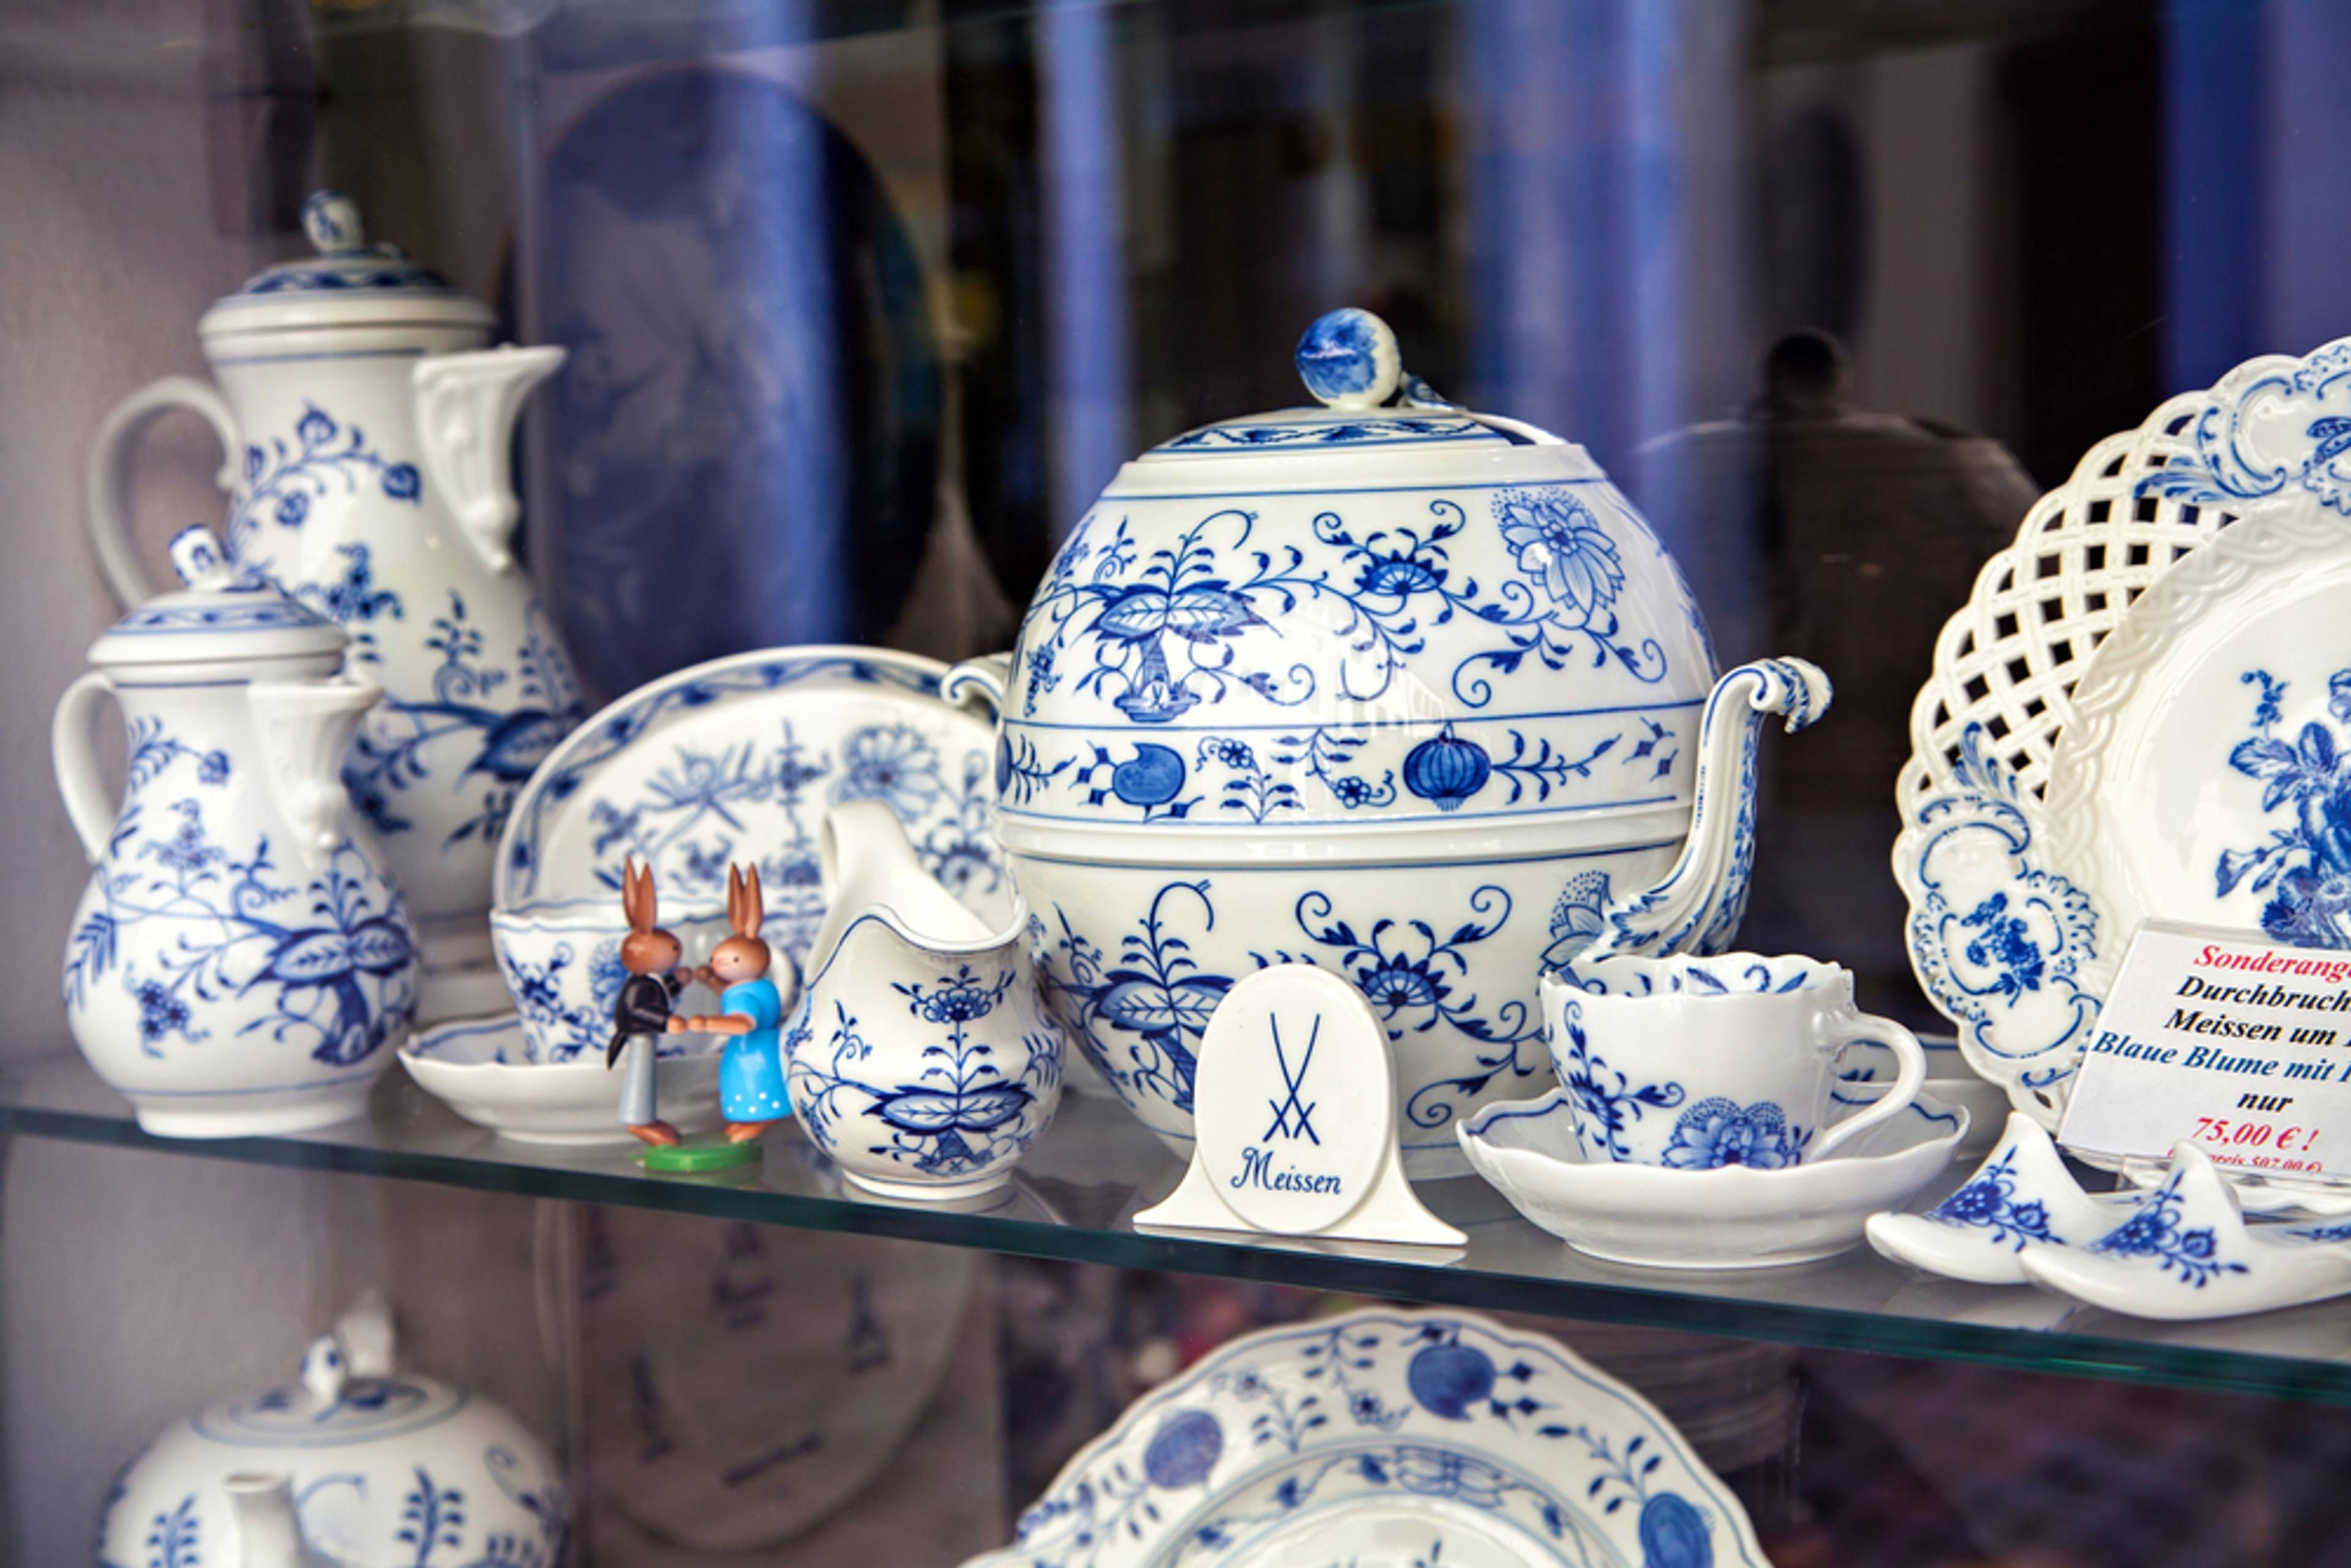 State Porcelain Manufactory